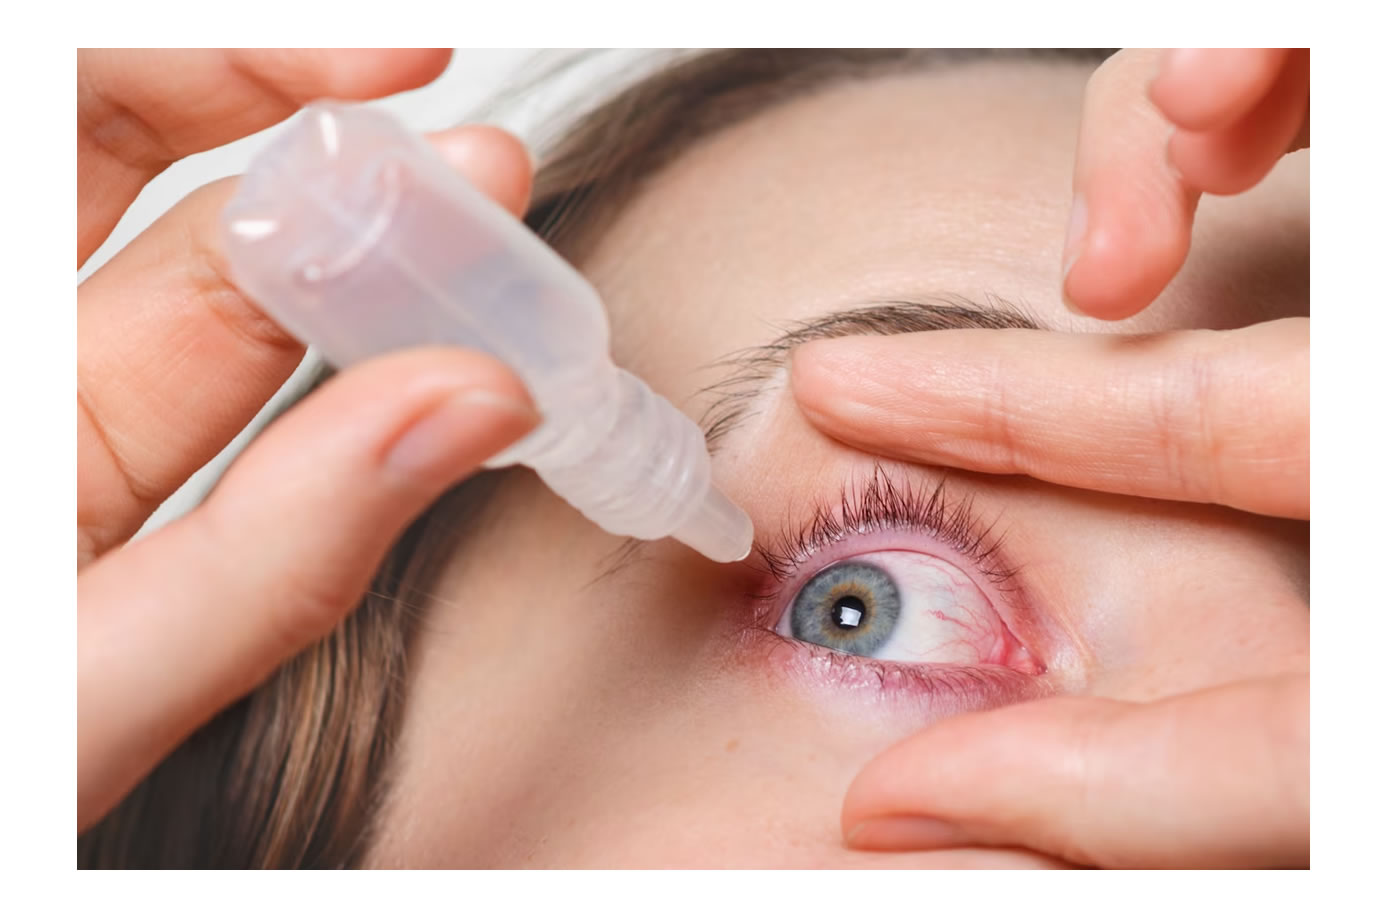 Learn what conjunctivitis is and how to treat it